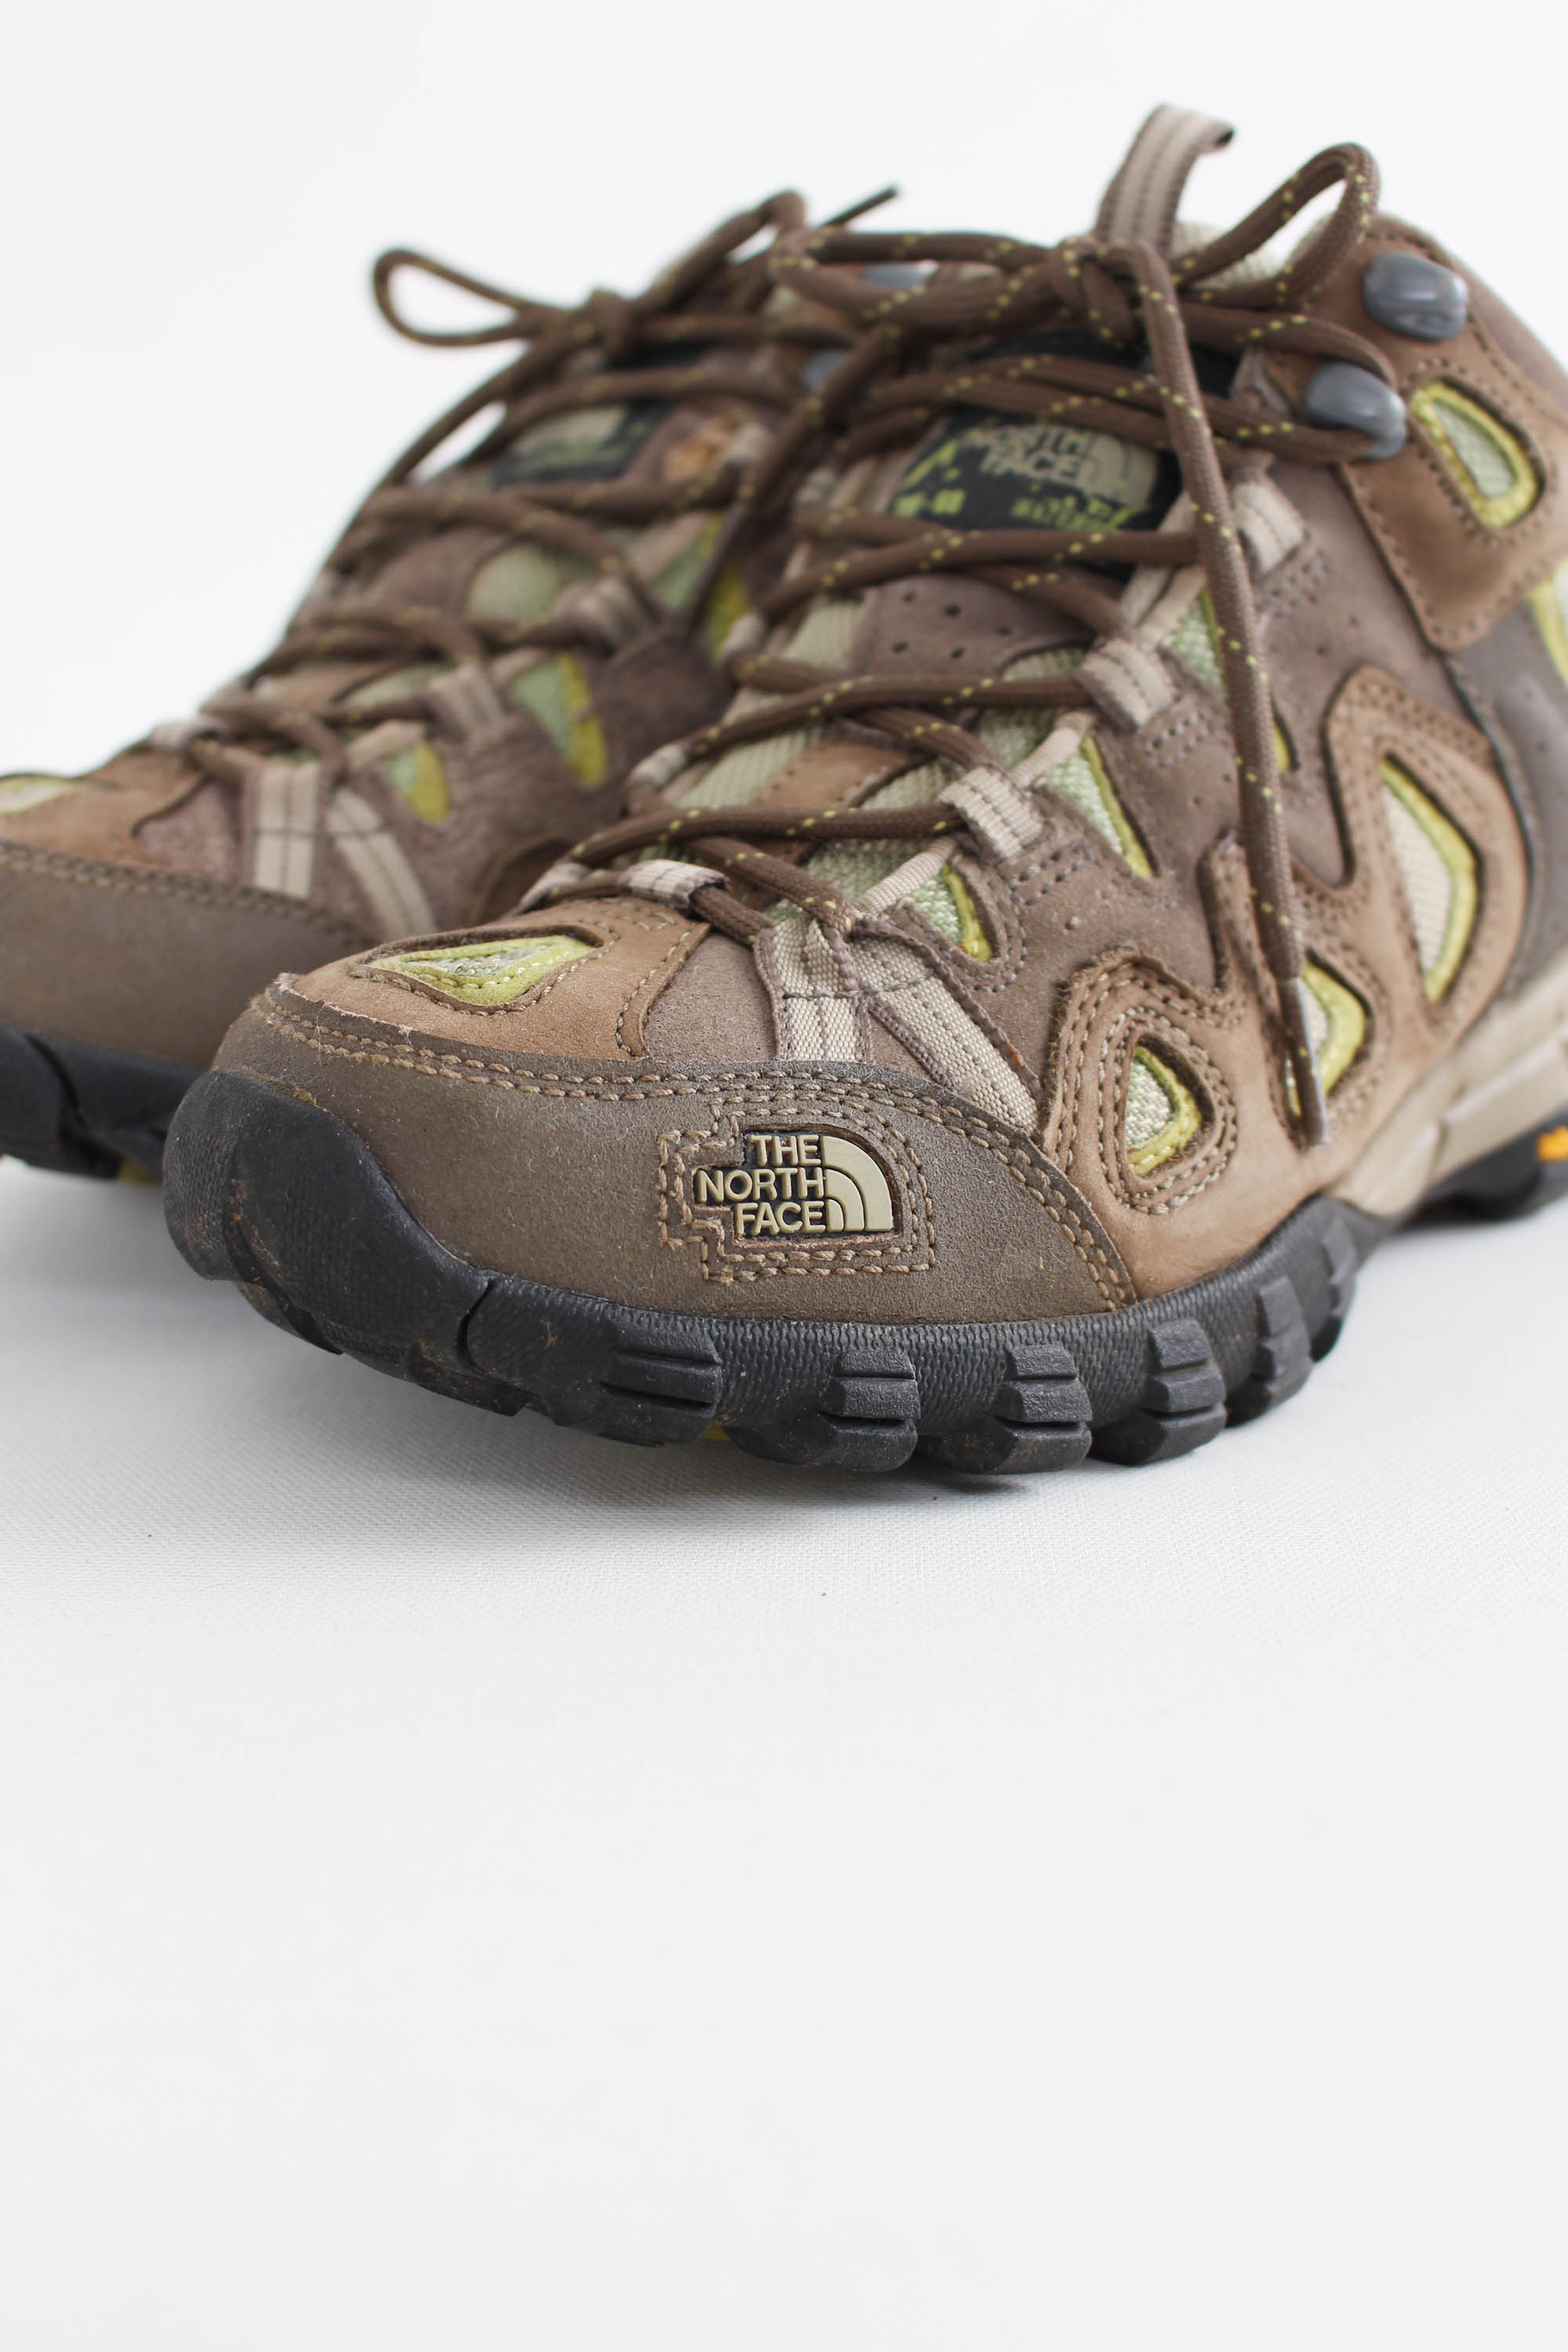 THE NORTH FACE hiking shoes